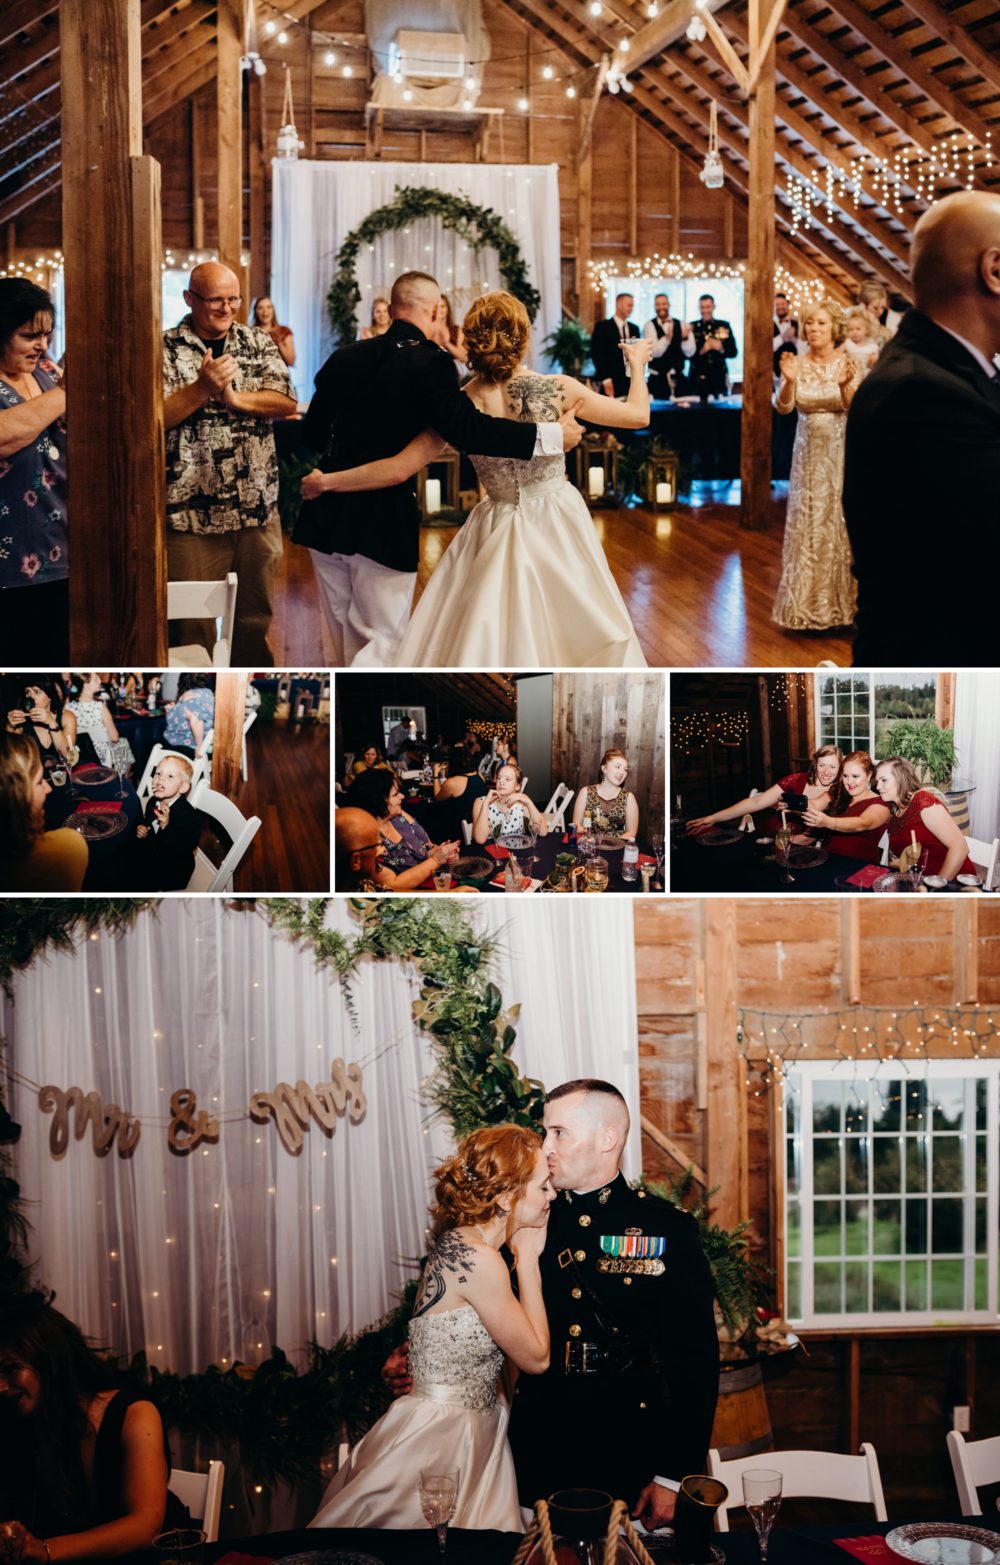 Let the party begin! Bostic Lake Ranch Wedding in Redmond, WA by Briana Morrison